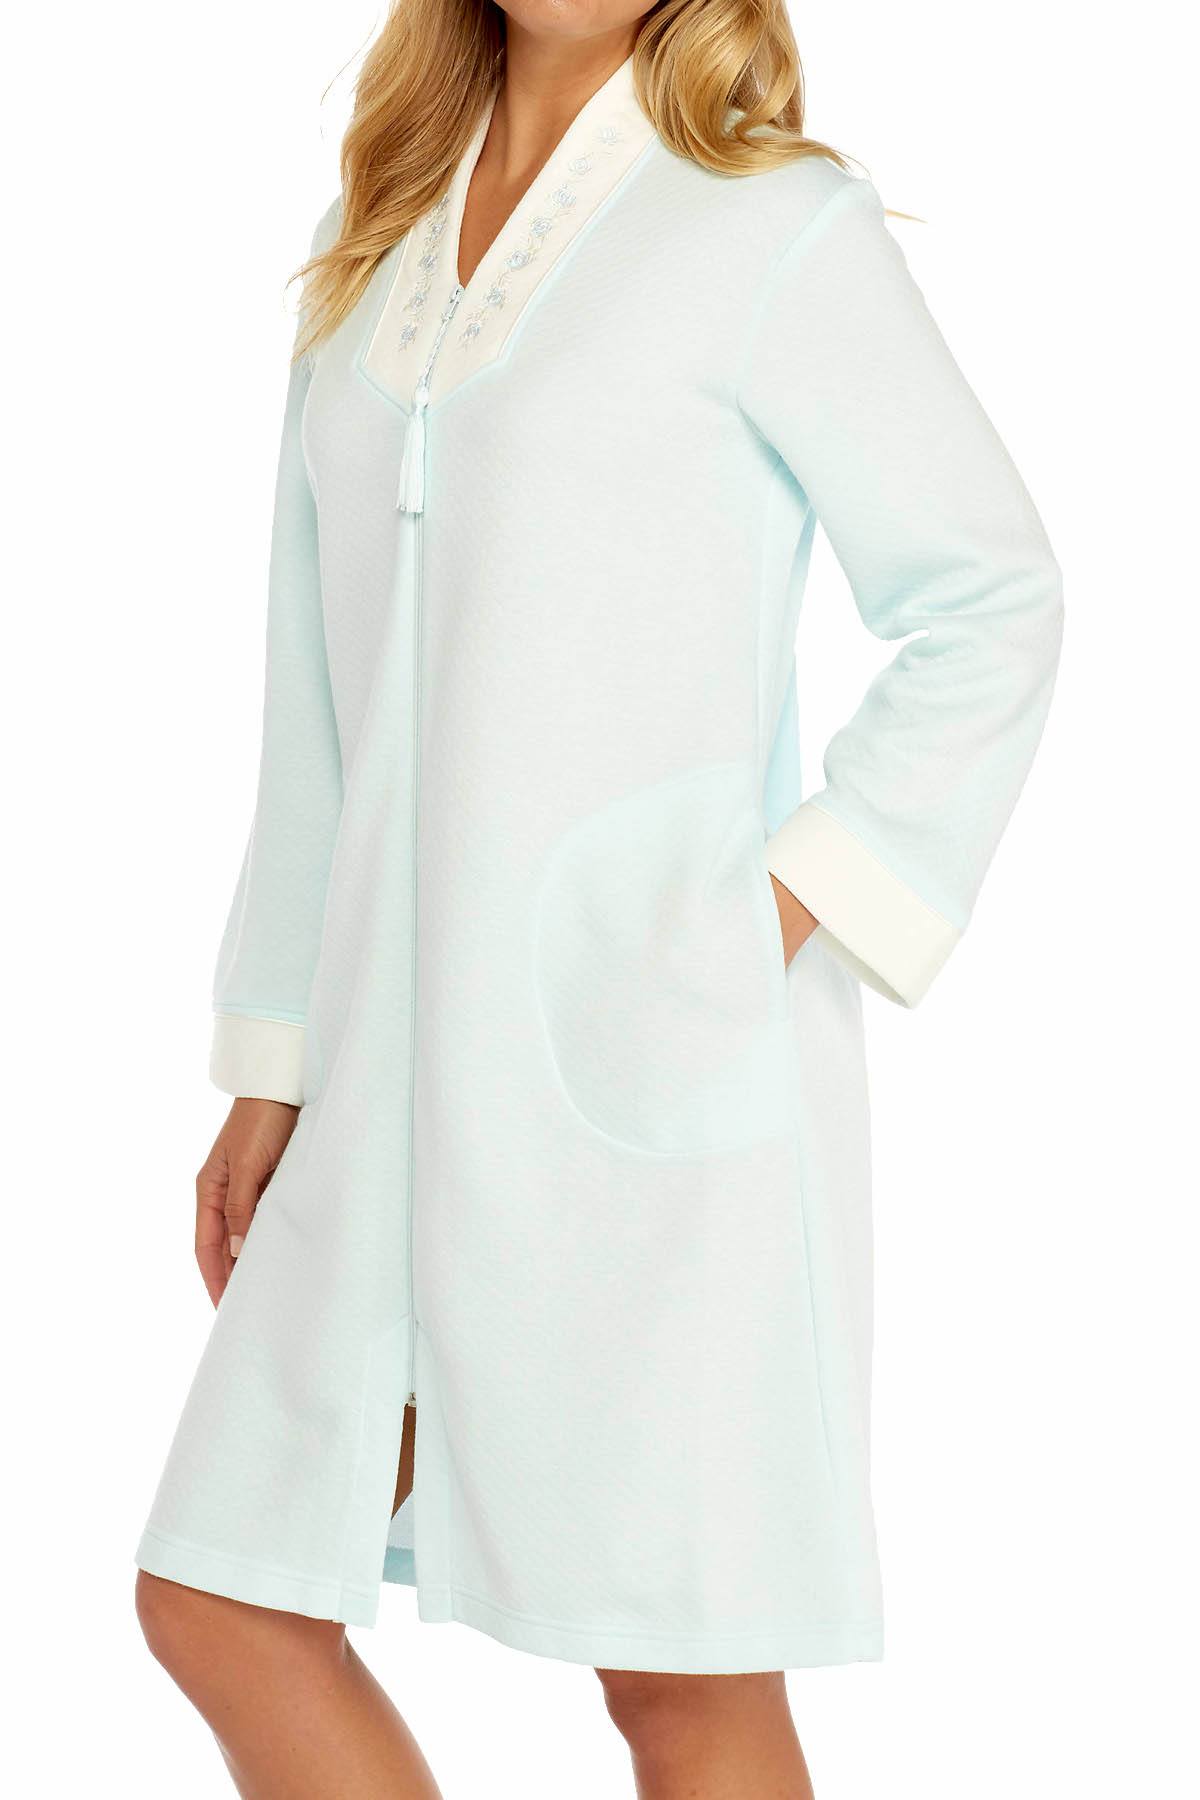 Miss Elaine Aqua Embroidery-Trimmed Zip-Front Robe